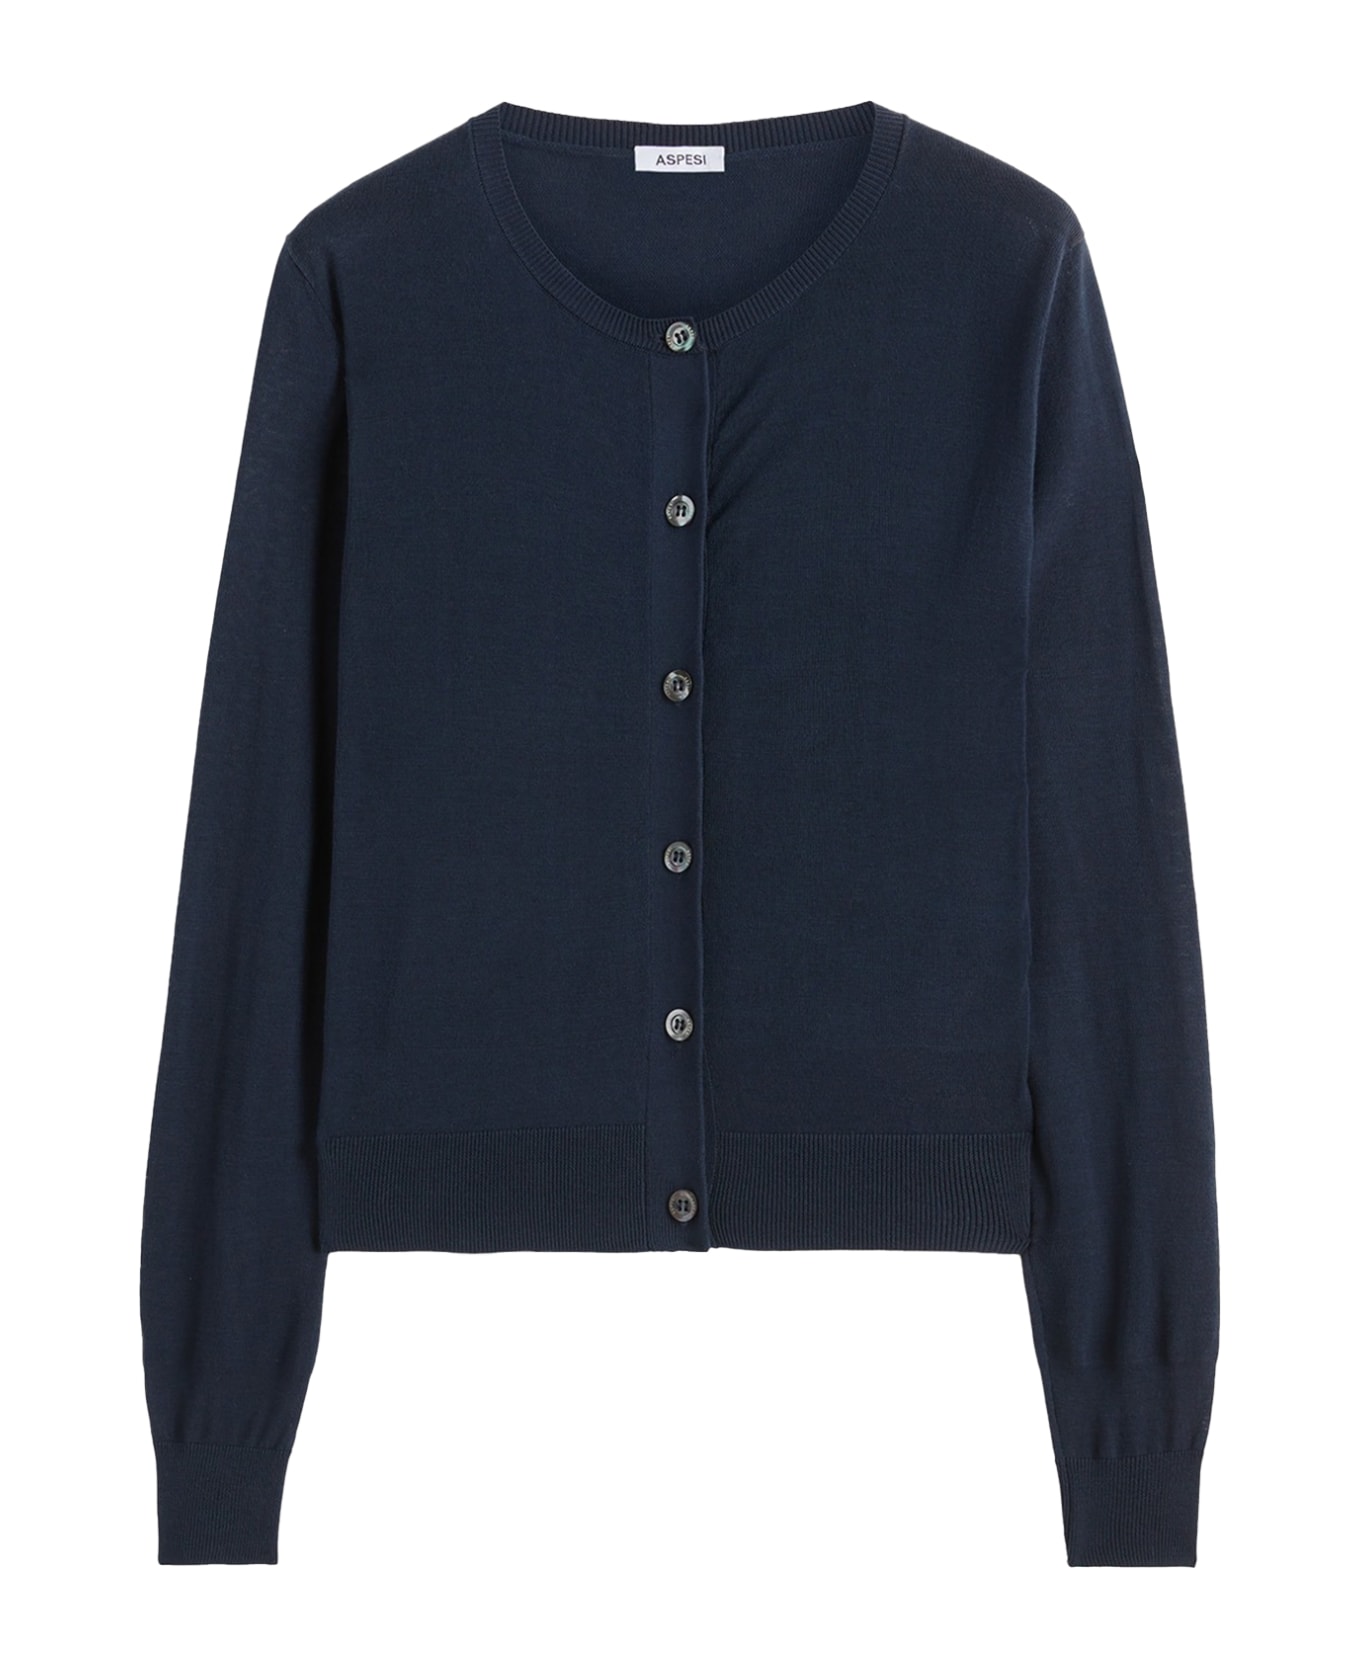 Aspesi Navy Blue Cardigan With Buttons - NAVY